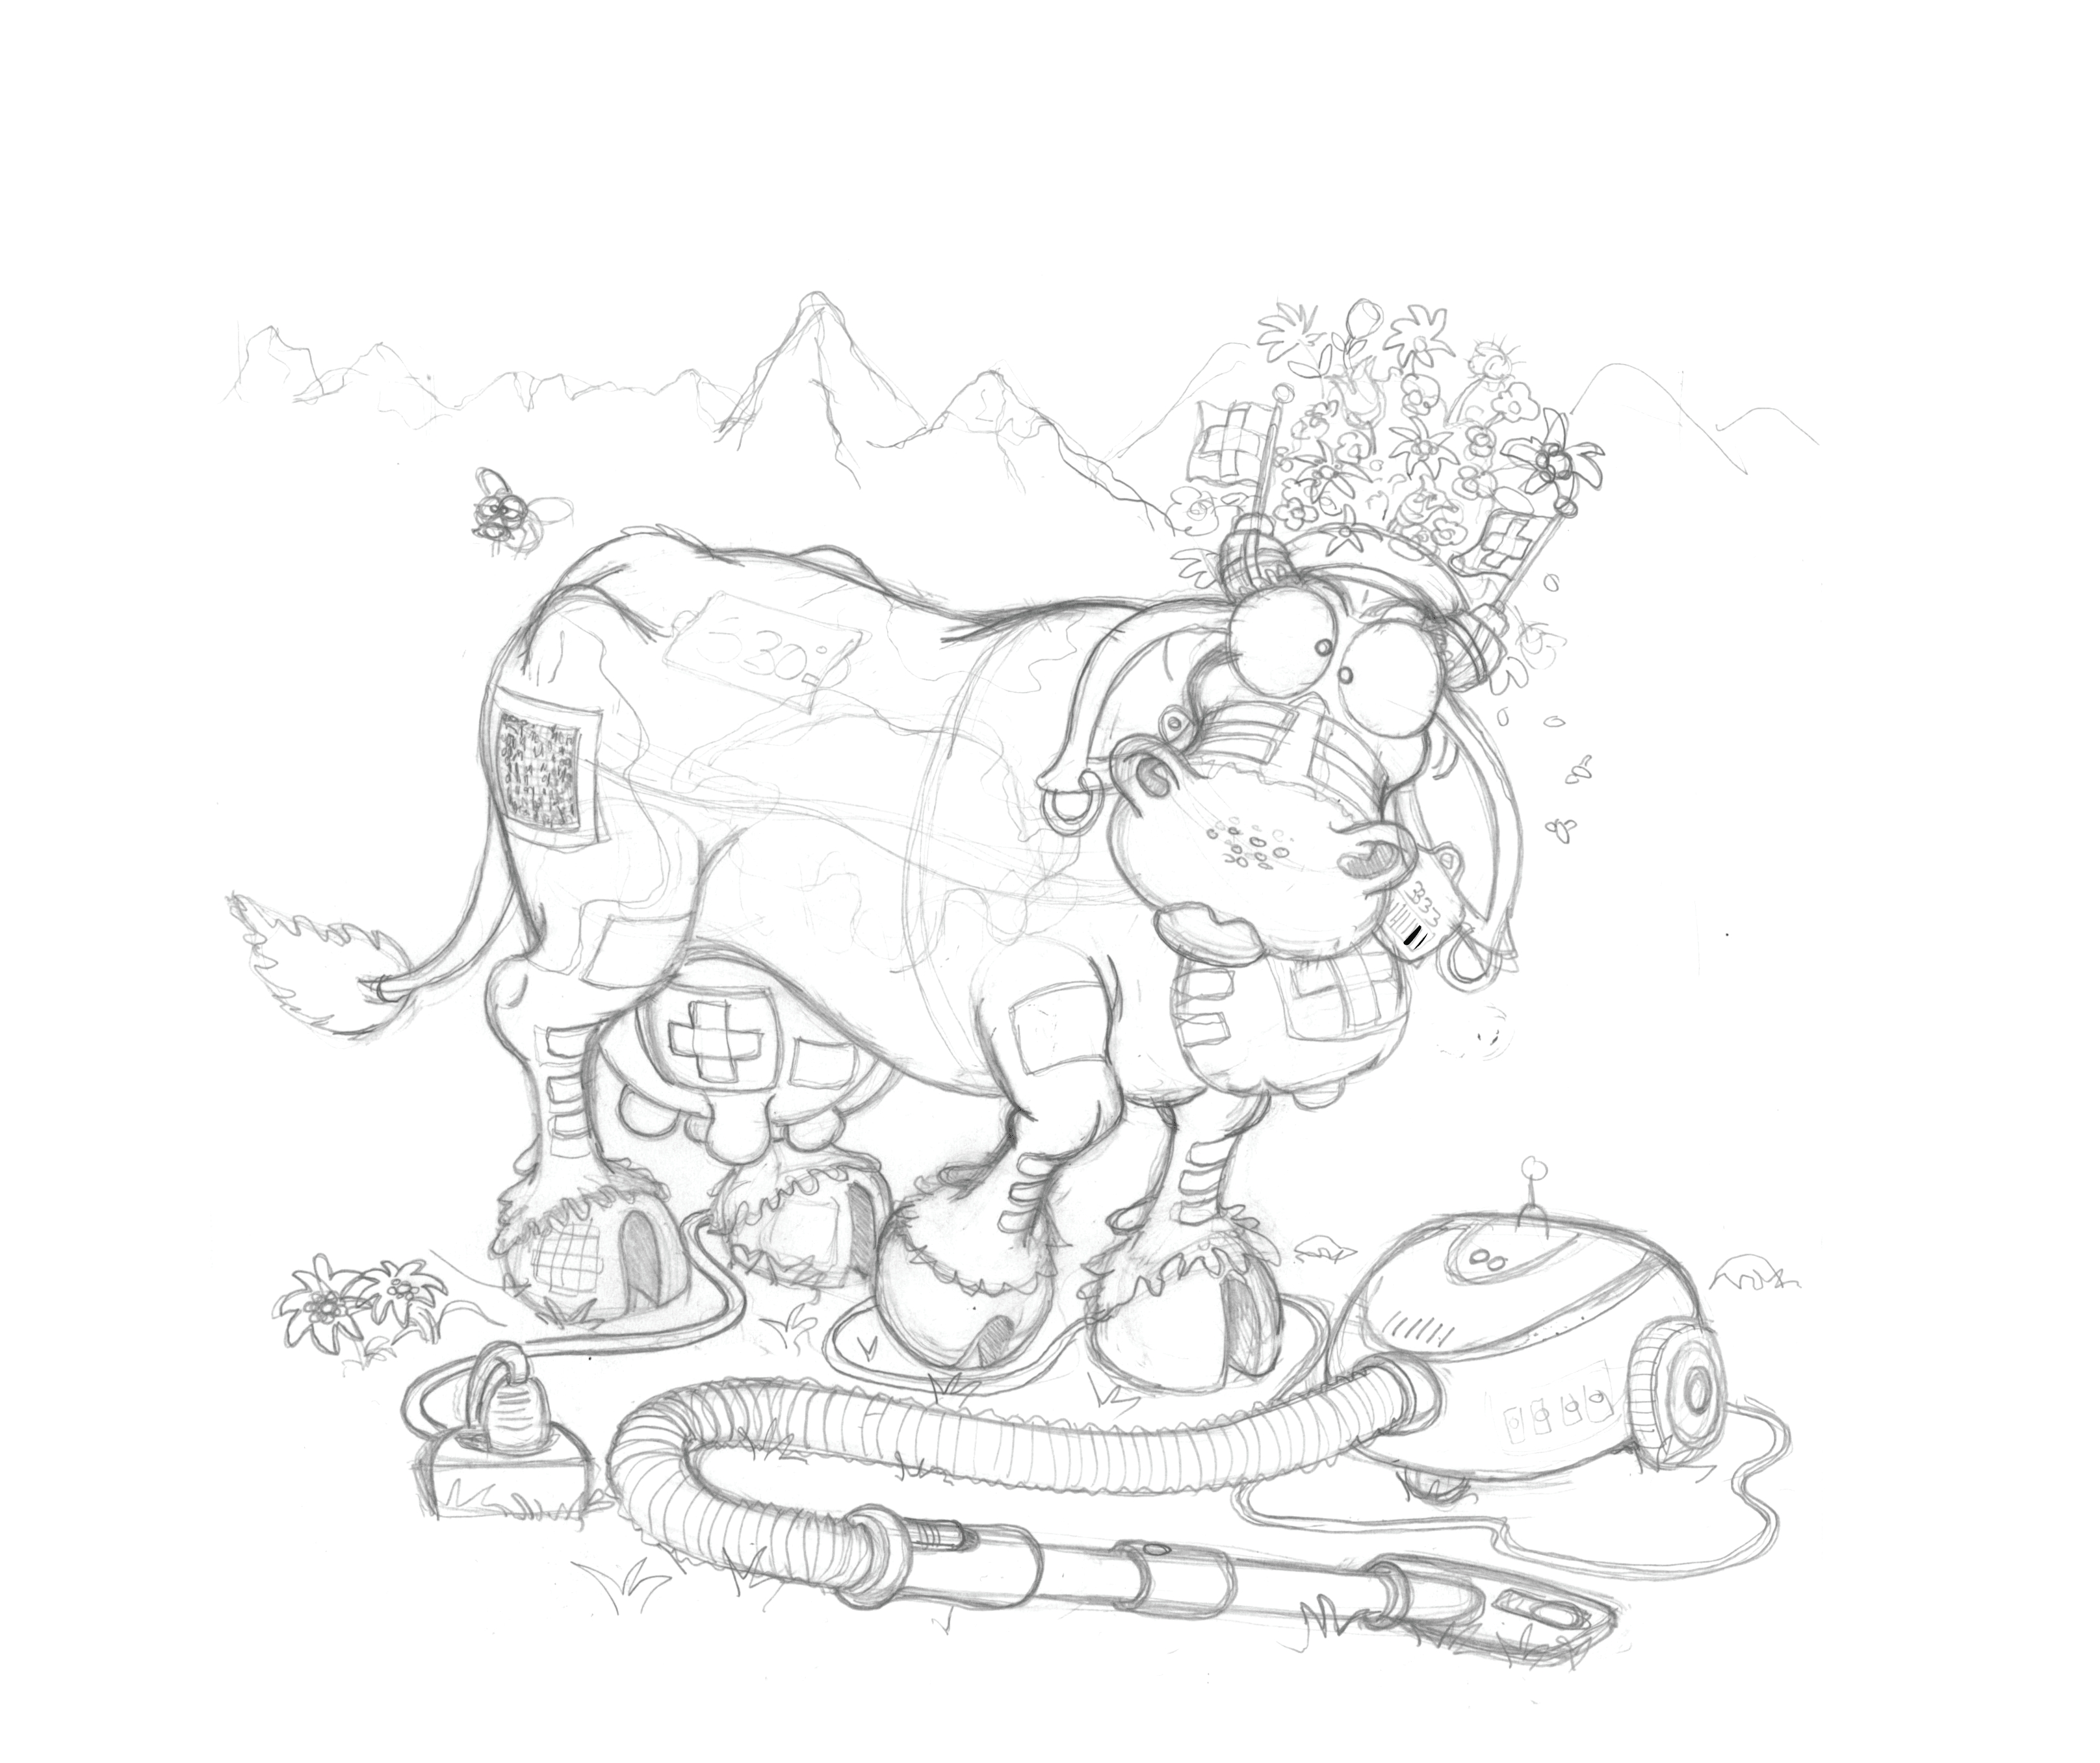 From draft to colour. The swiss cow